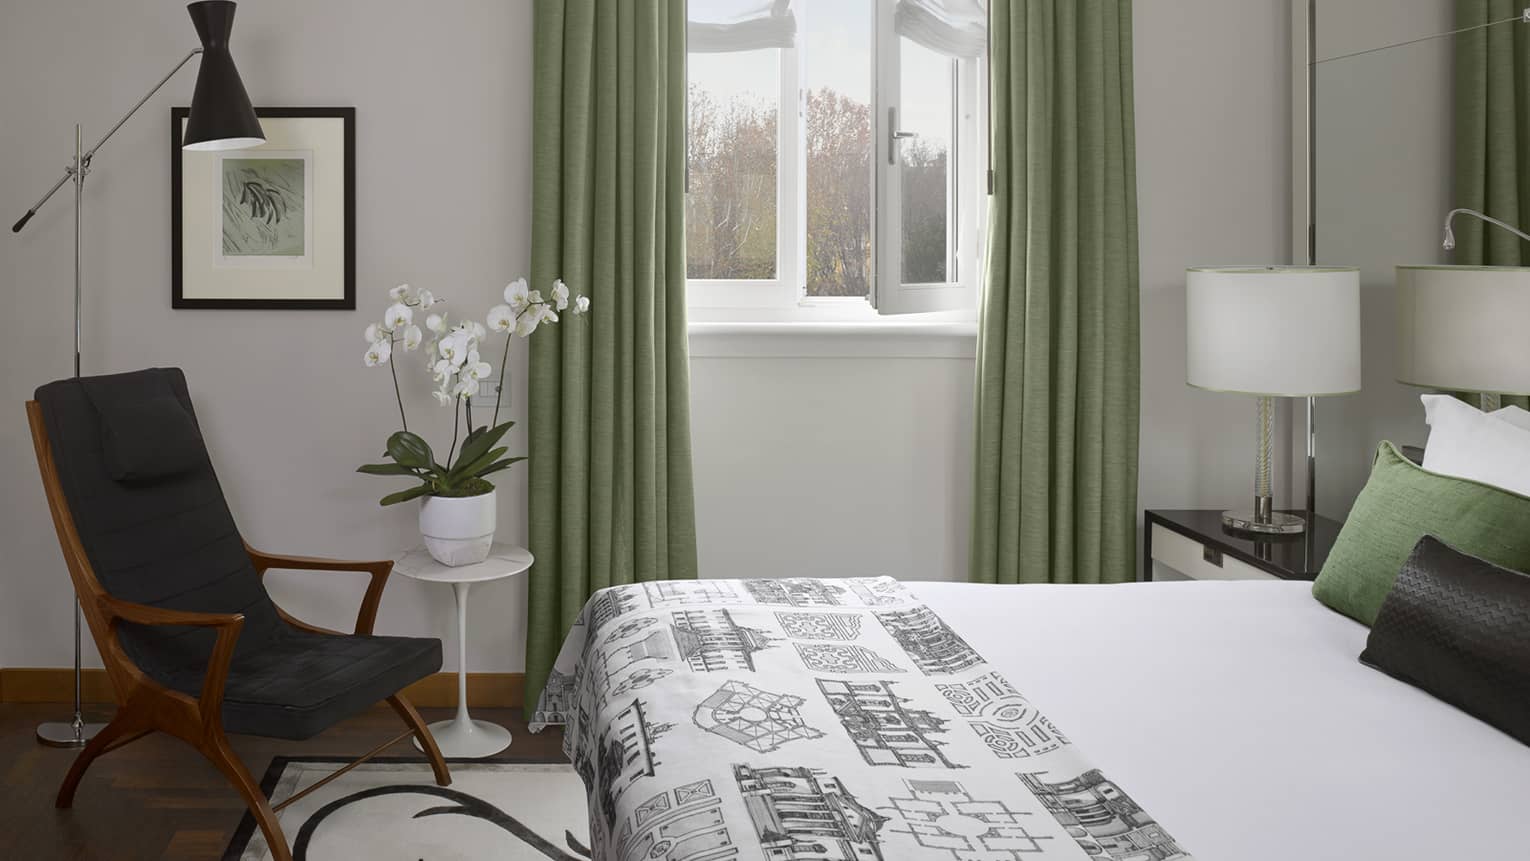 Hotel suite with white bed with graphic coverlet at foot and green-toned pillows beside window flanked with green curtains and modern armchair